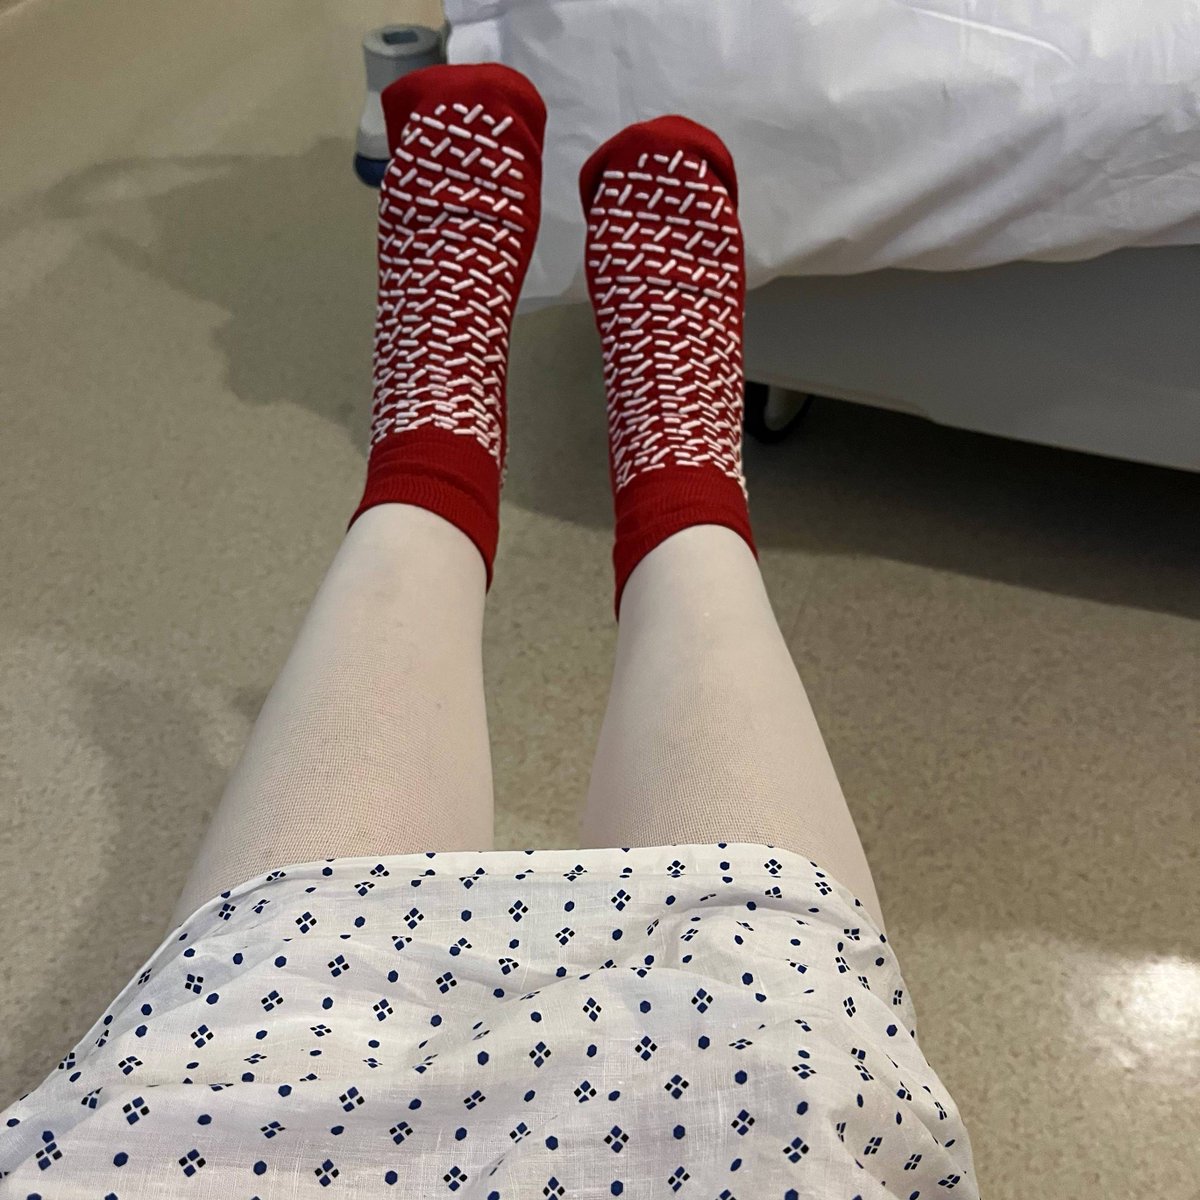 'More people should be aware of how straightforward donating can be.” Debbi from Swindon recently donated her #stemcells via bone marrow donation. Be a hero like Debbi! Join the #DKMS stem cell register today. 🙌